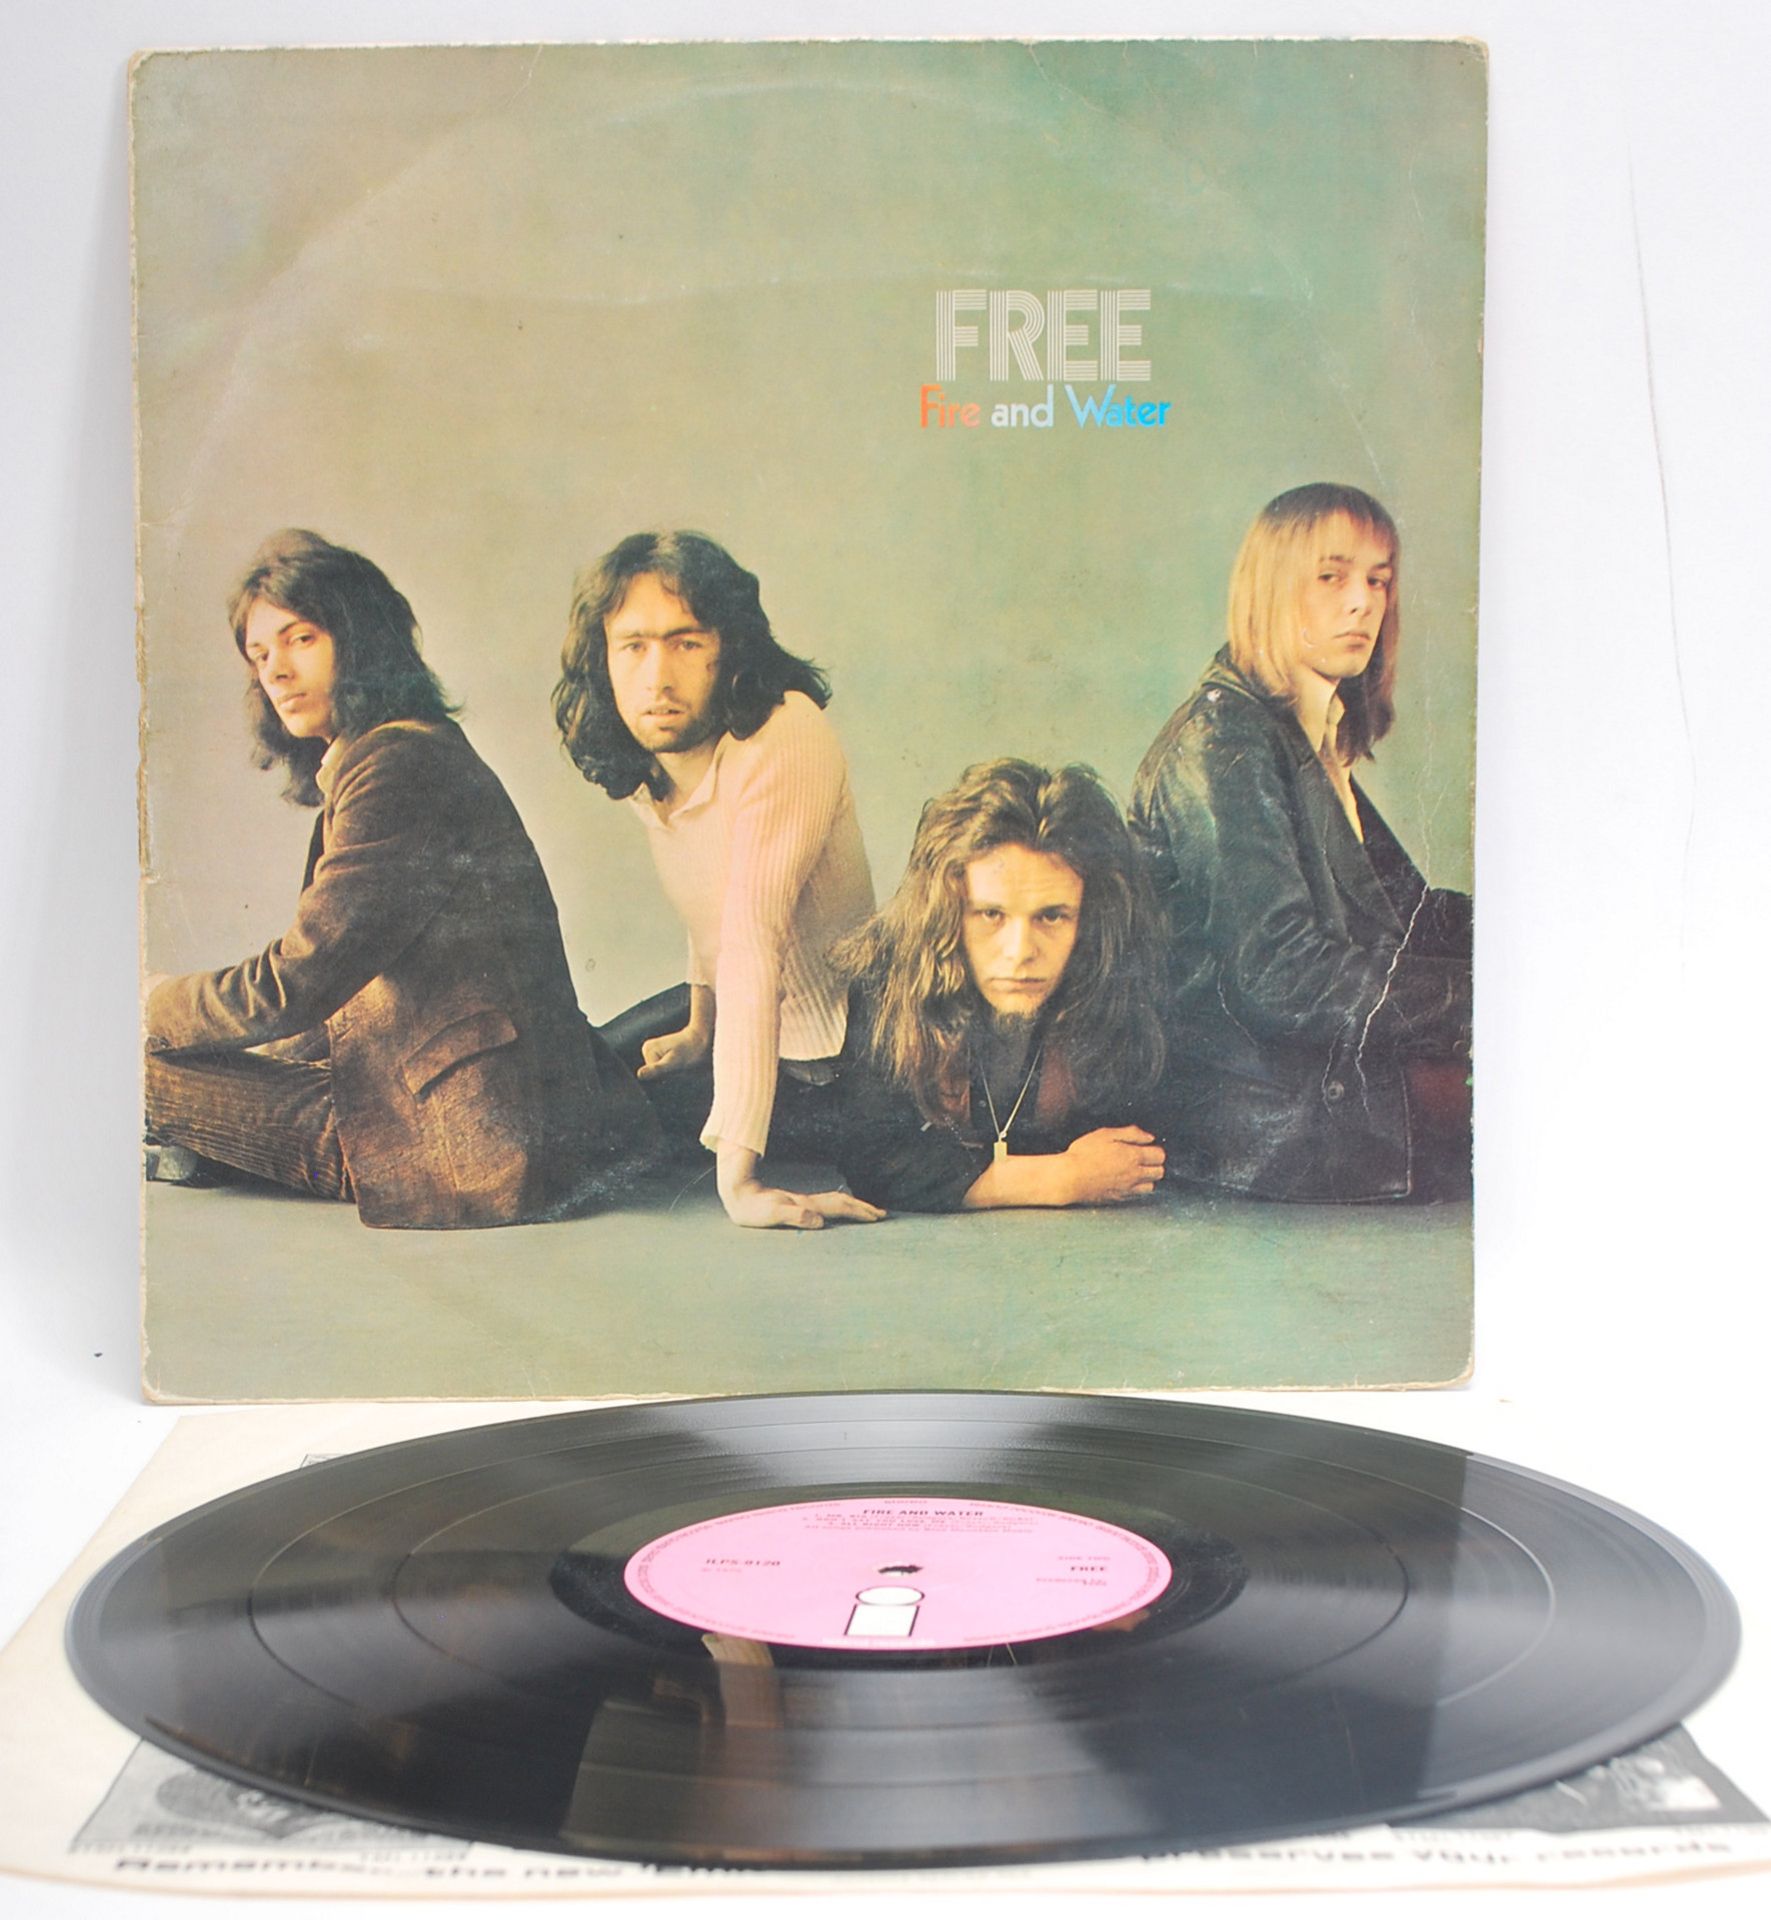 Vinyl long play LP record album by Free – Fire And Water – Original Island Records Stereo 1st U.K.